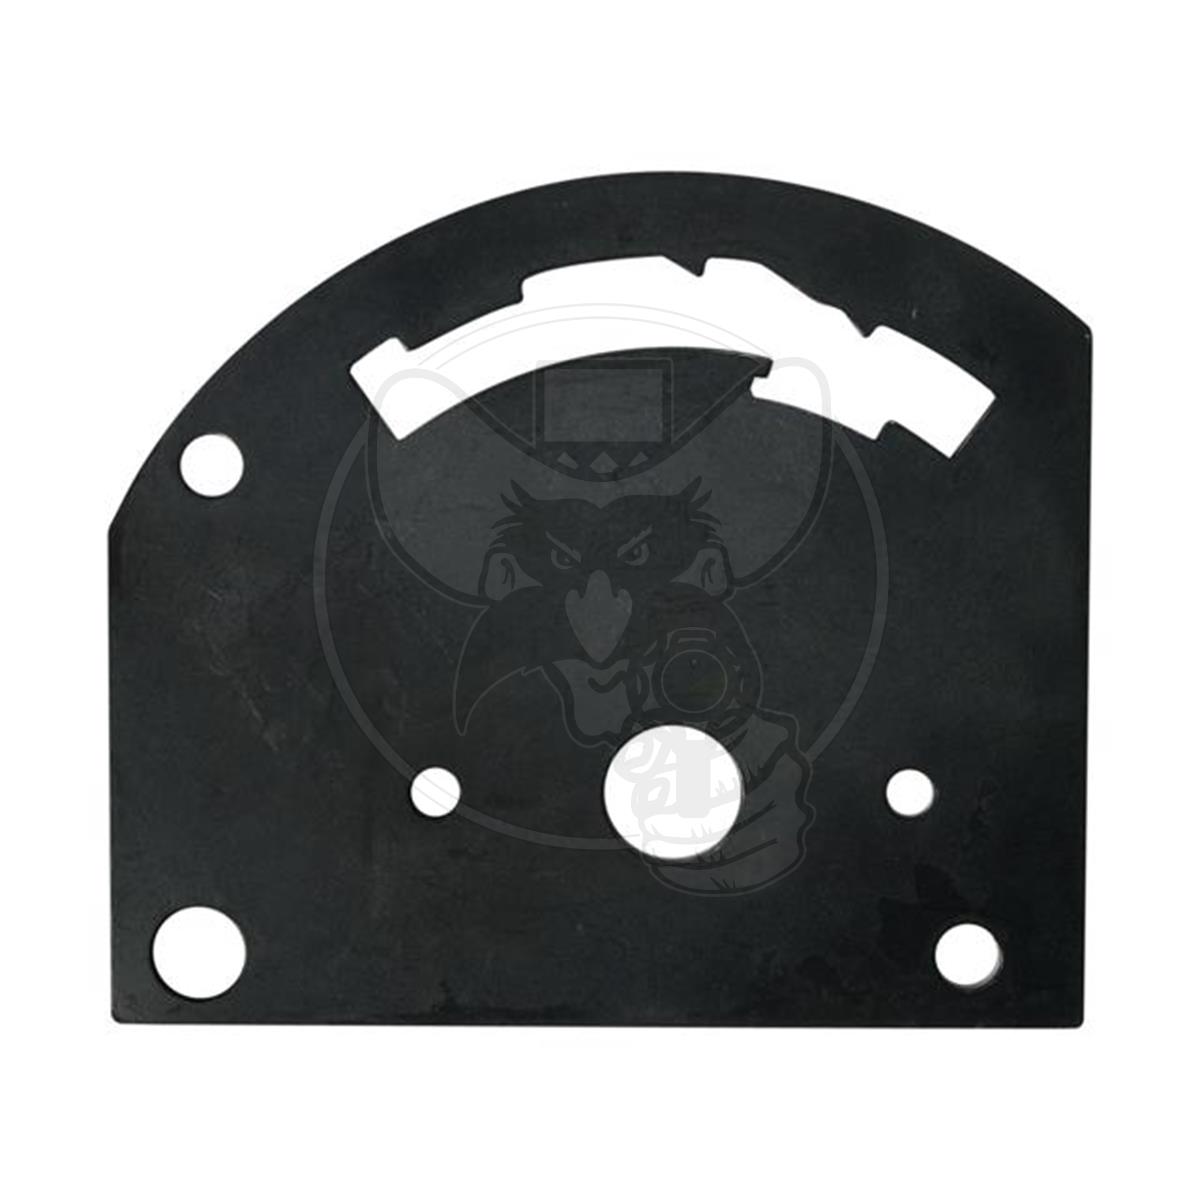 B&M 4 SPEED GATE PLATE FITS TURBO 700 R4 WITH FORWARD PATTERN